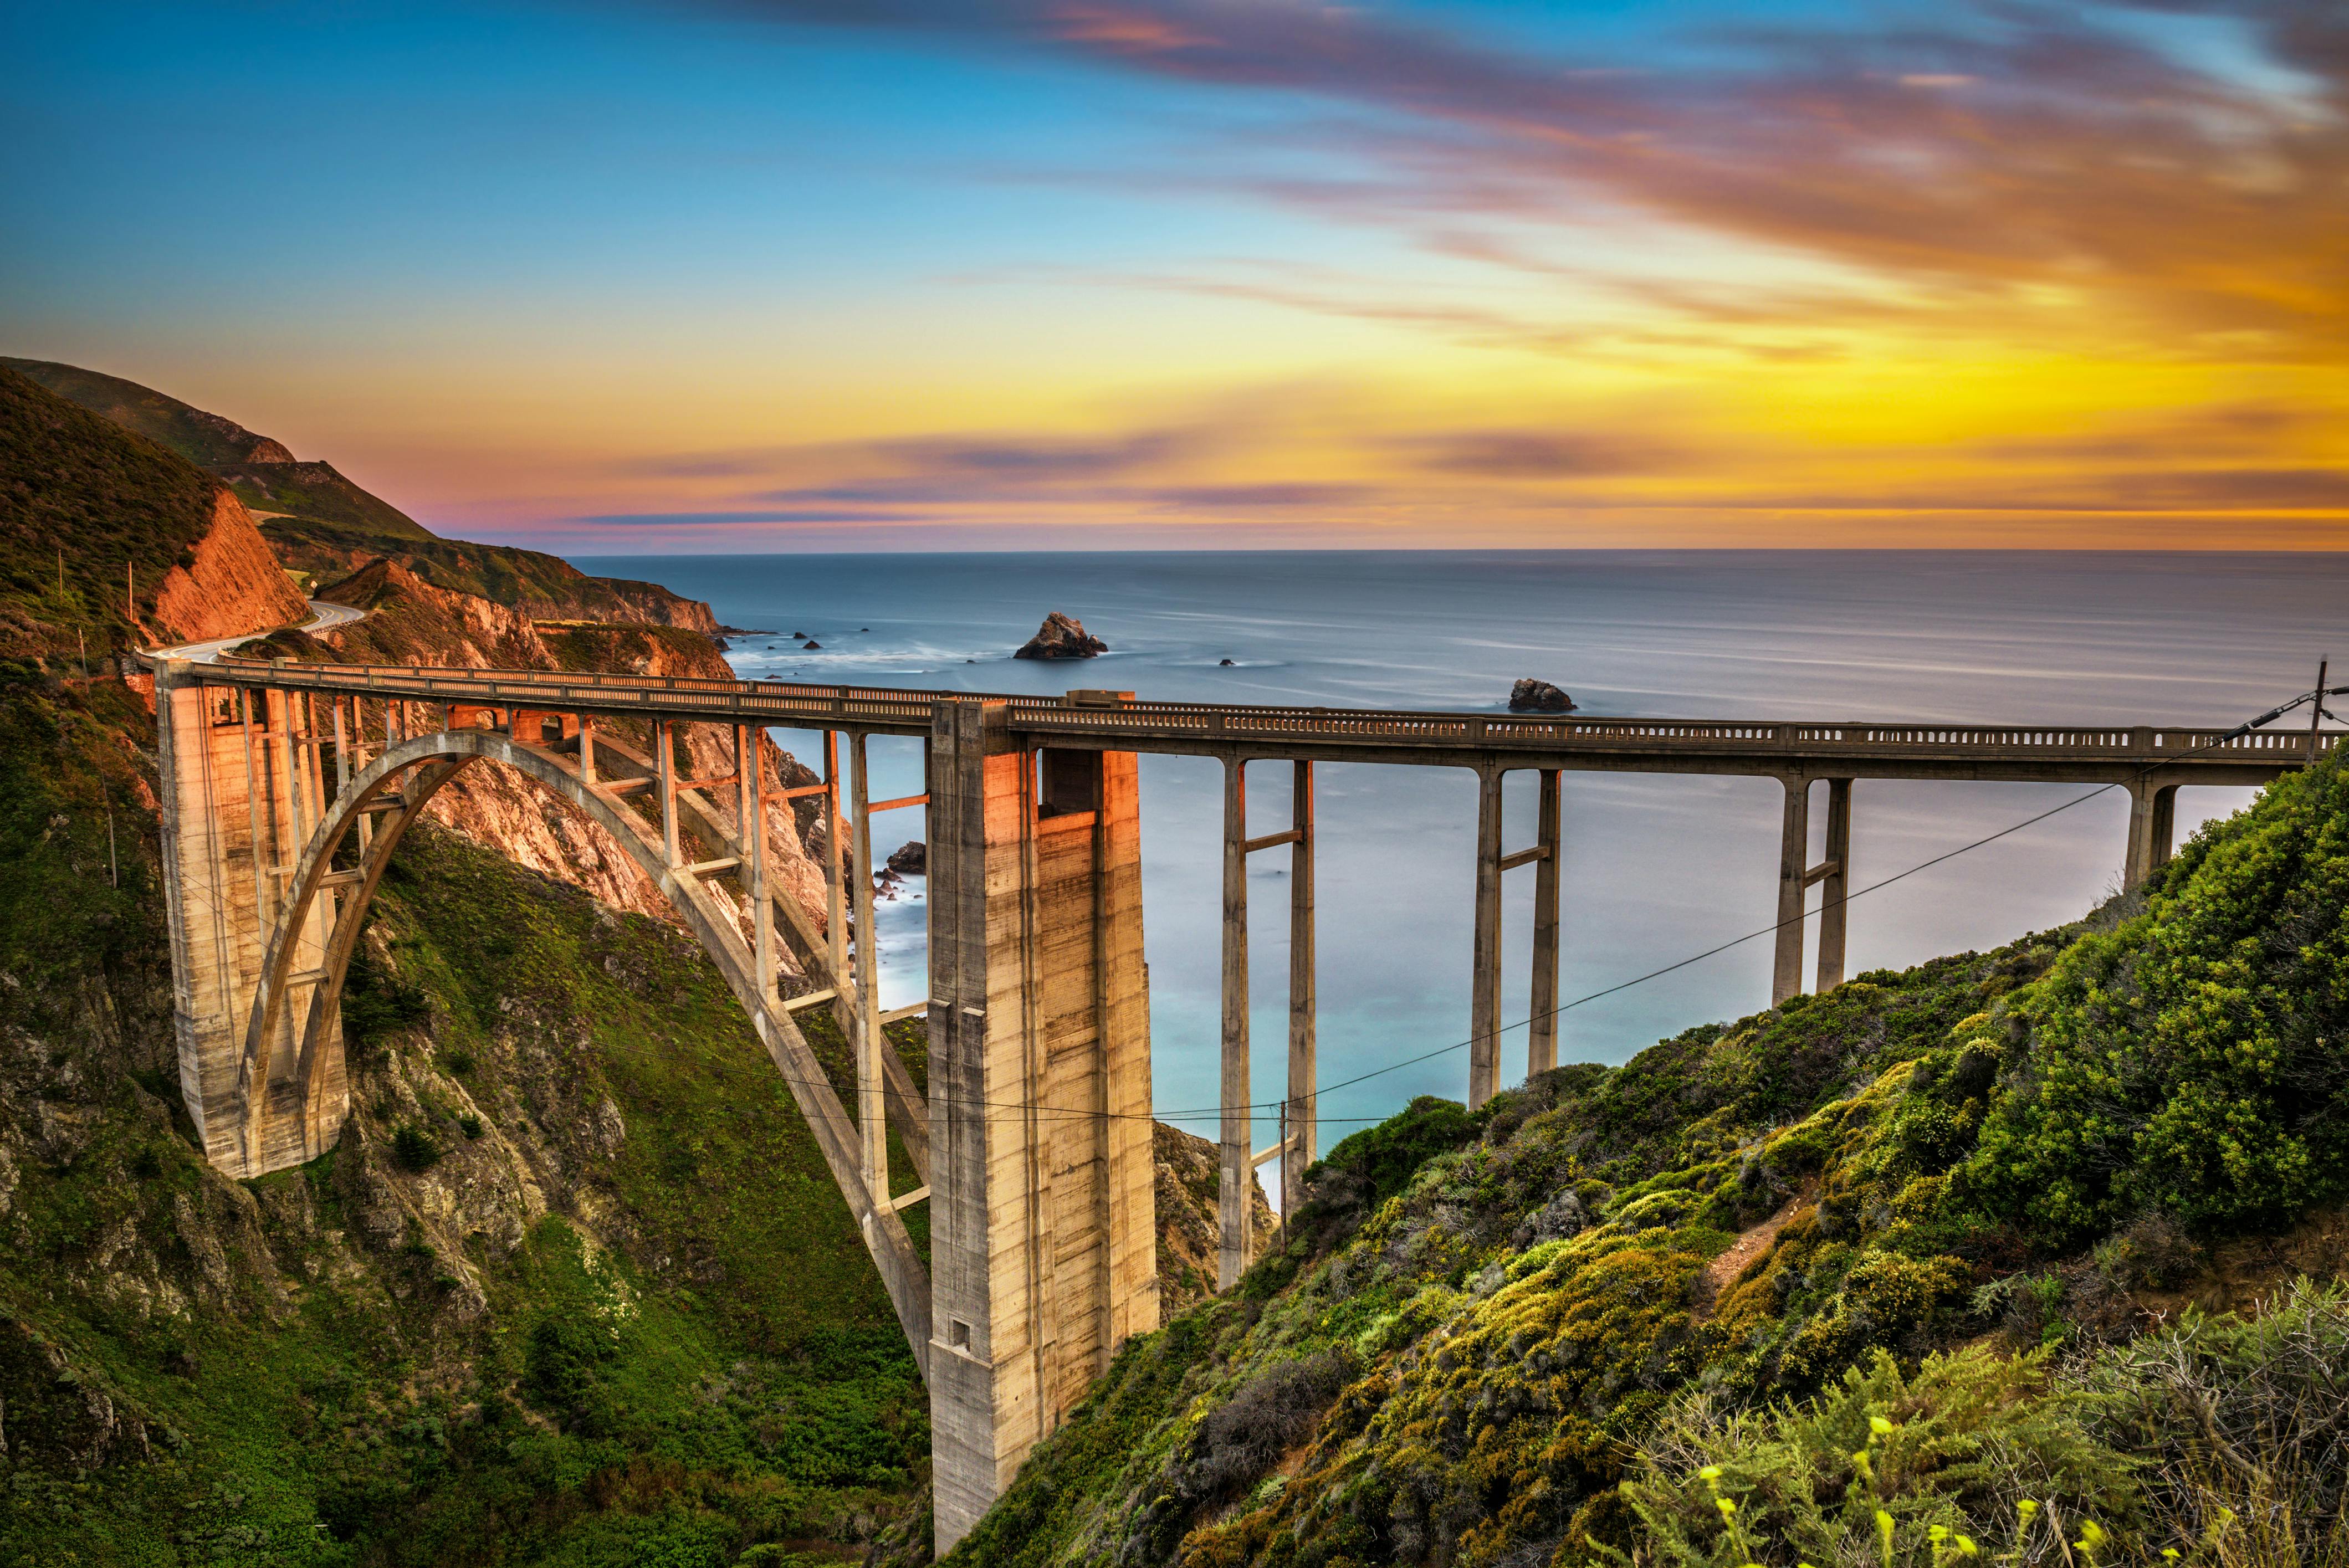 View of a scenic motorcycle route along the Pacific Coast Highway and Bixby Bridge at sunset